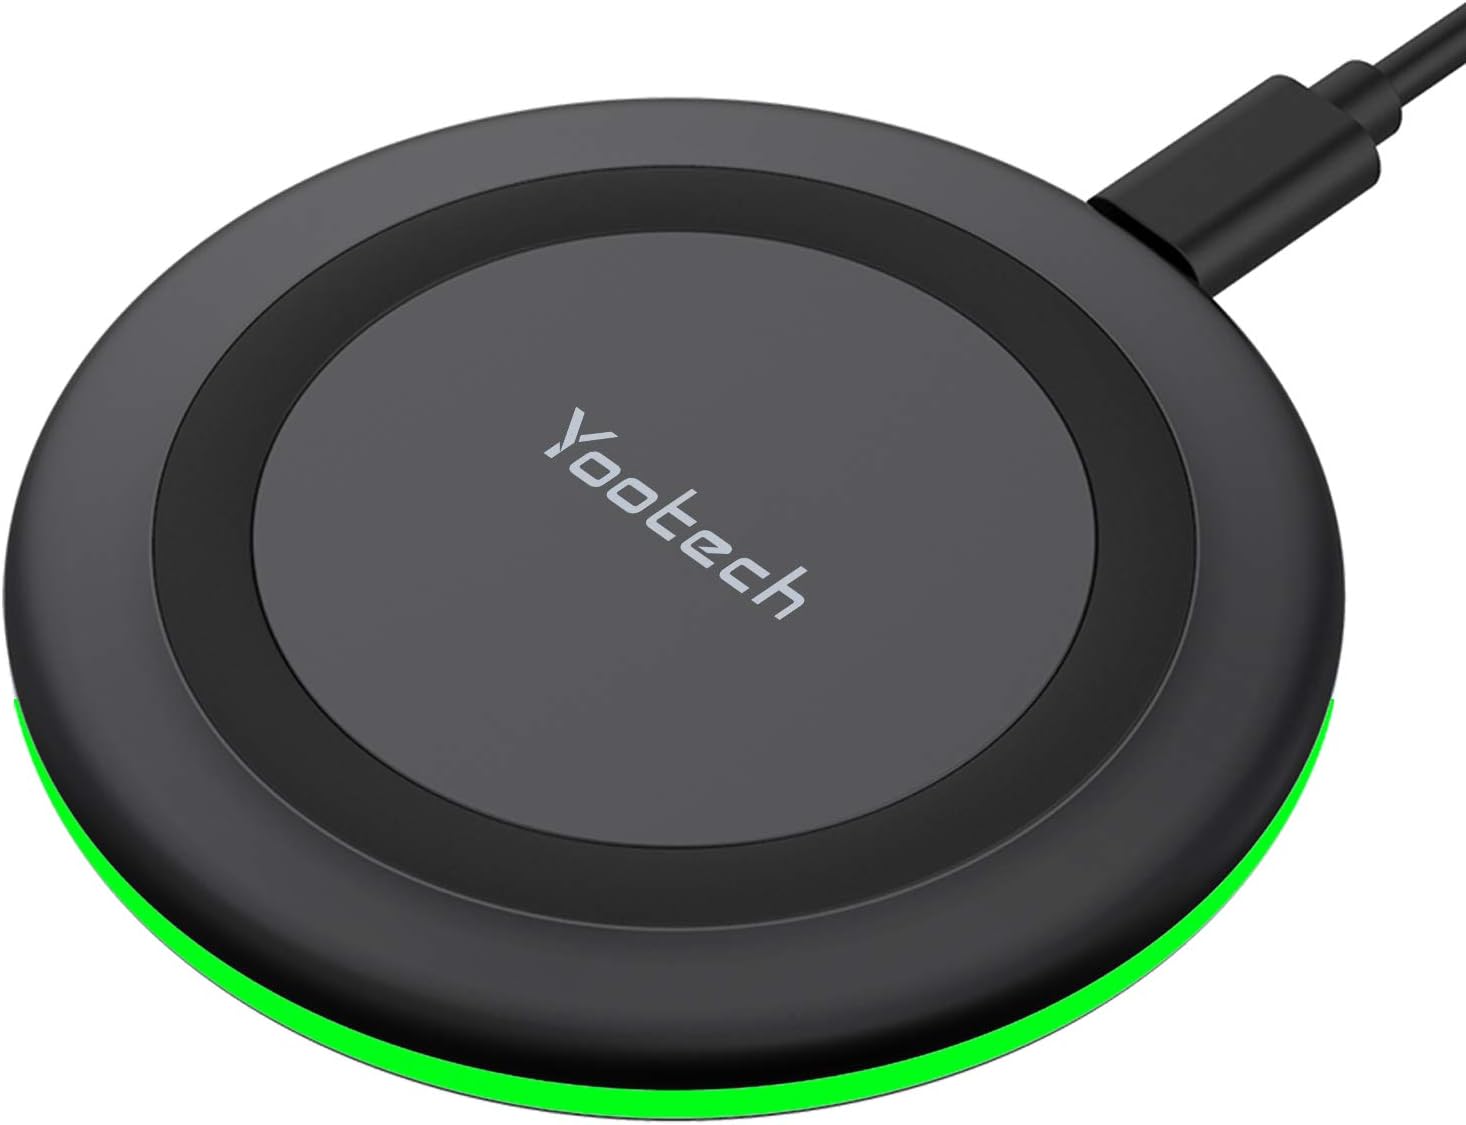 10 Best Wireless Chargers For You